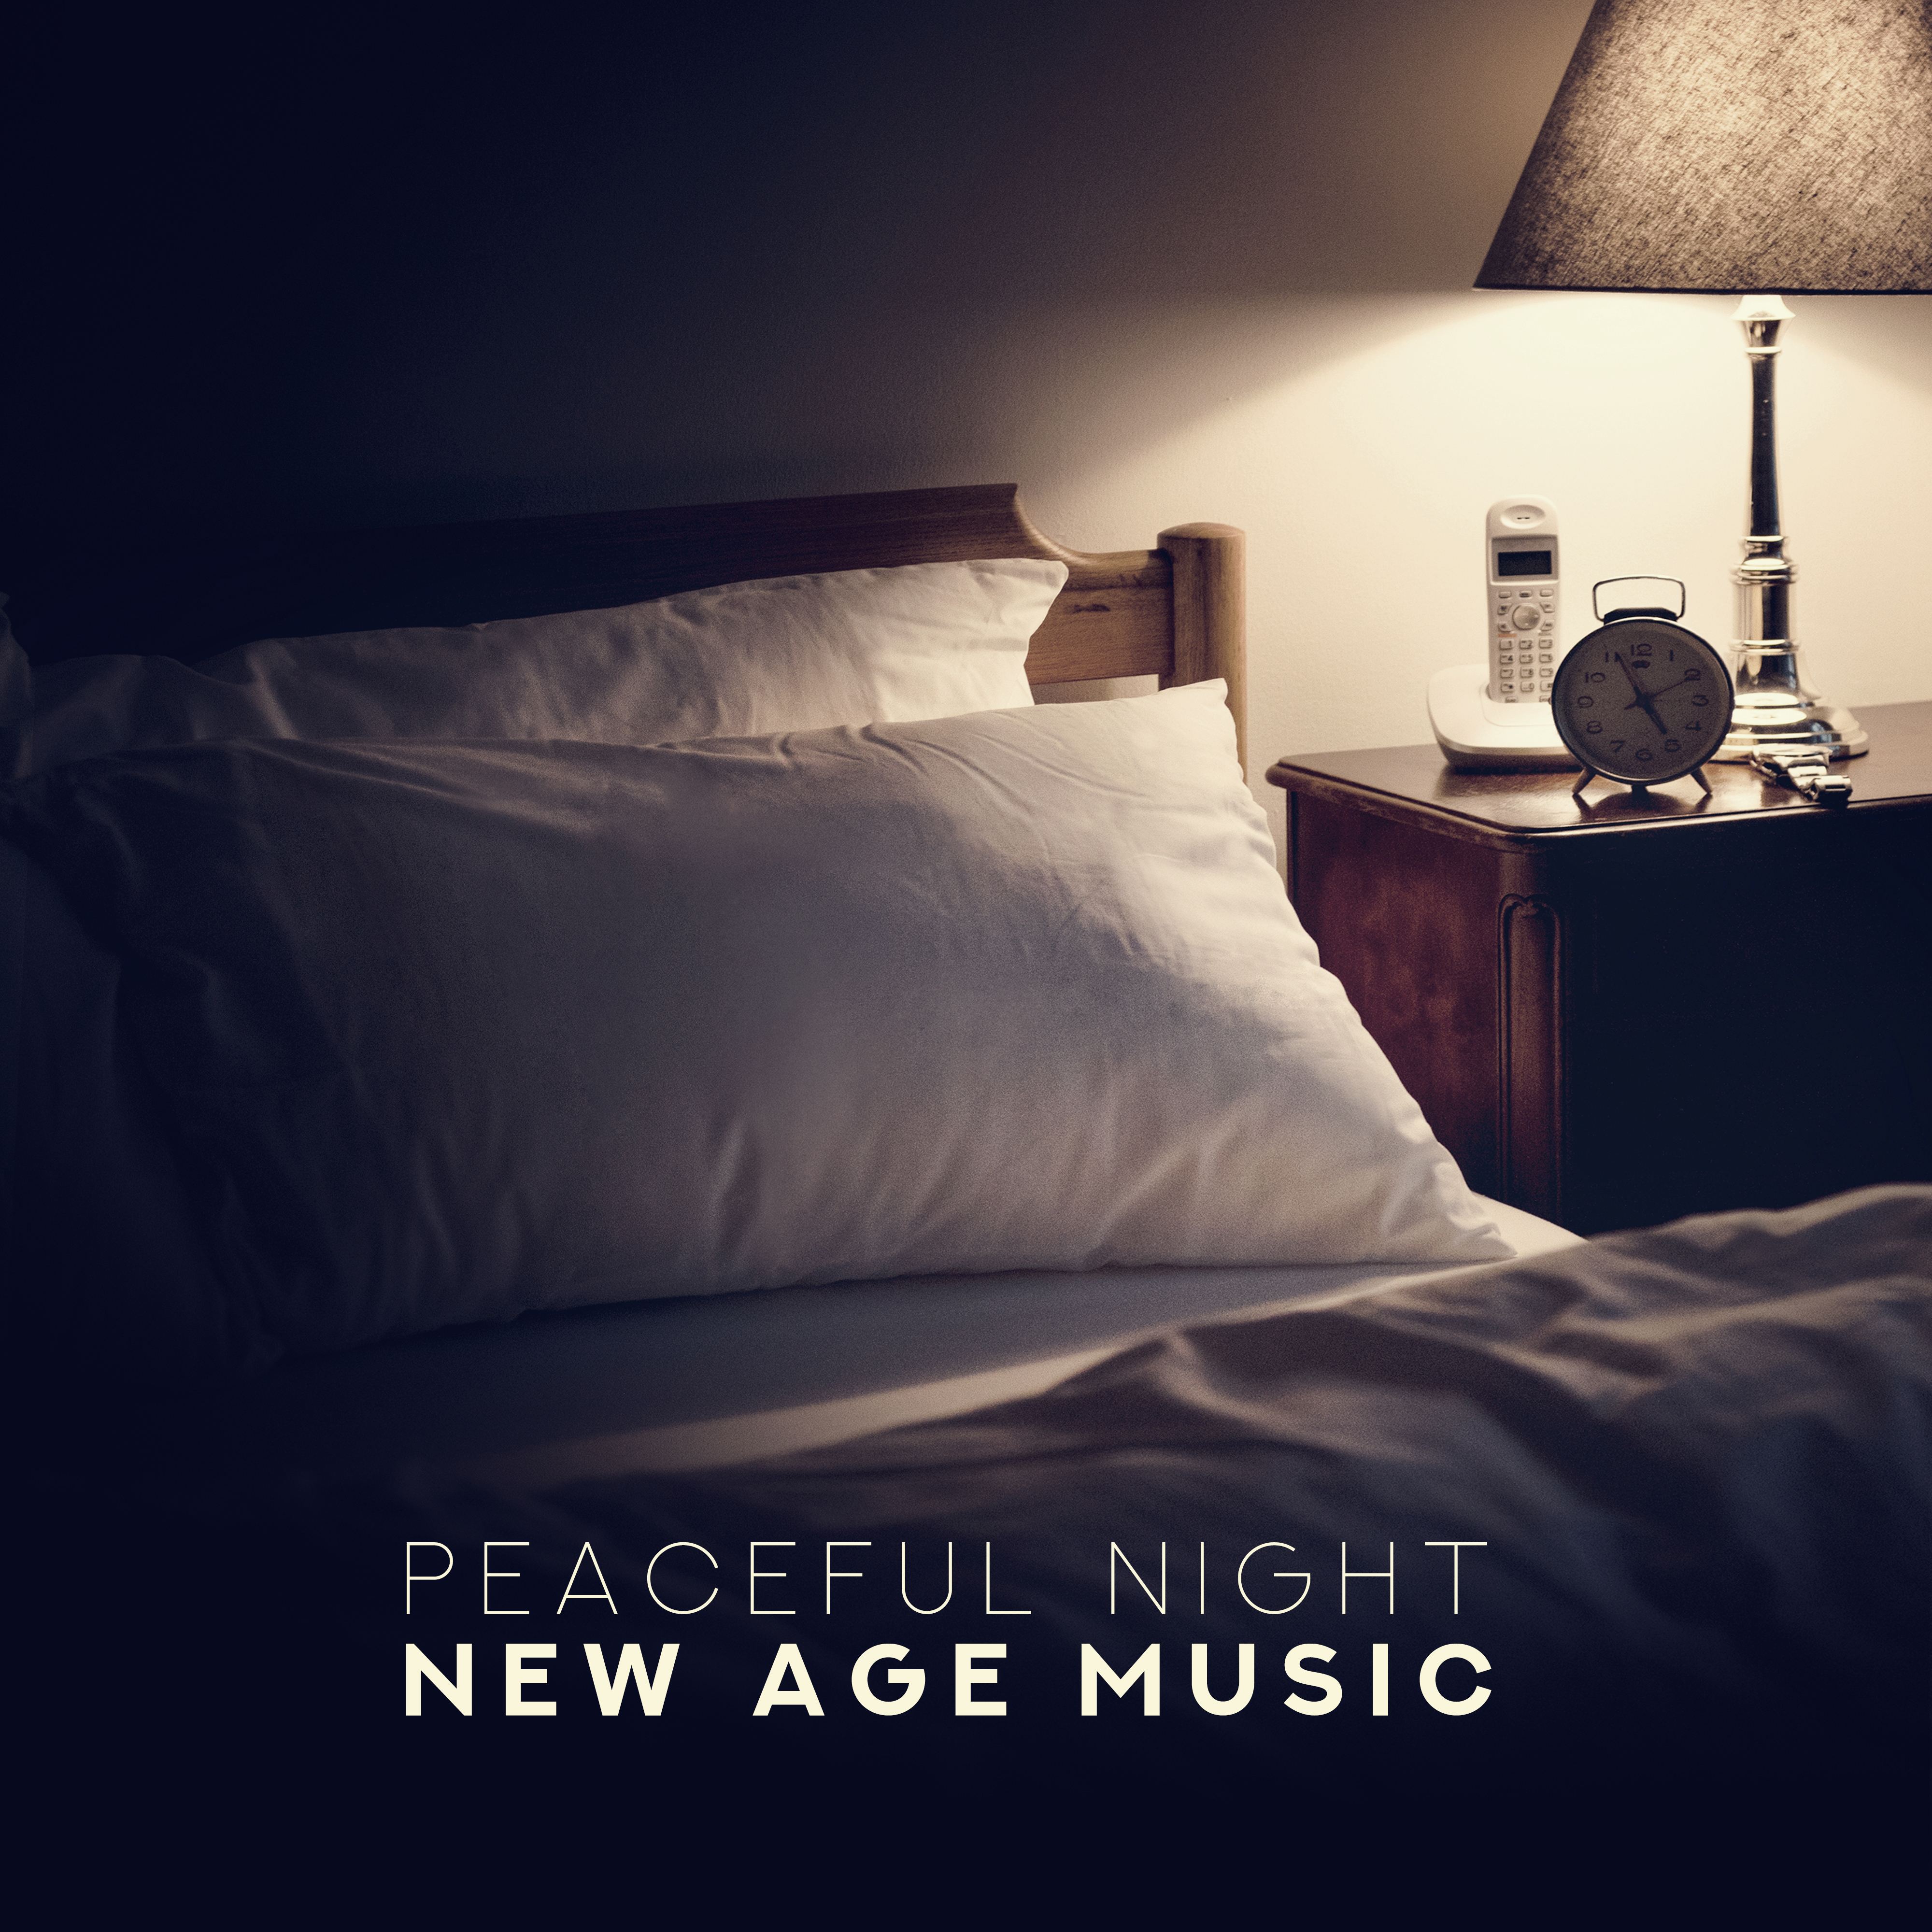 Peaceful Night New Age Music  Sleep Music to Help You Relax, Reduce Stress  Dream All Night Long